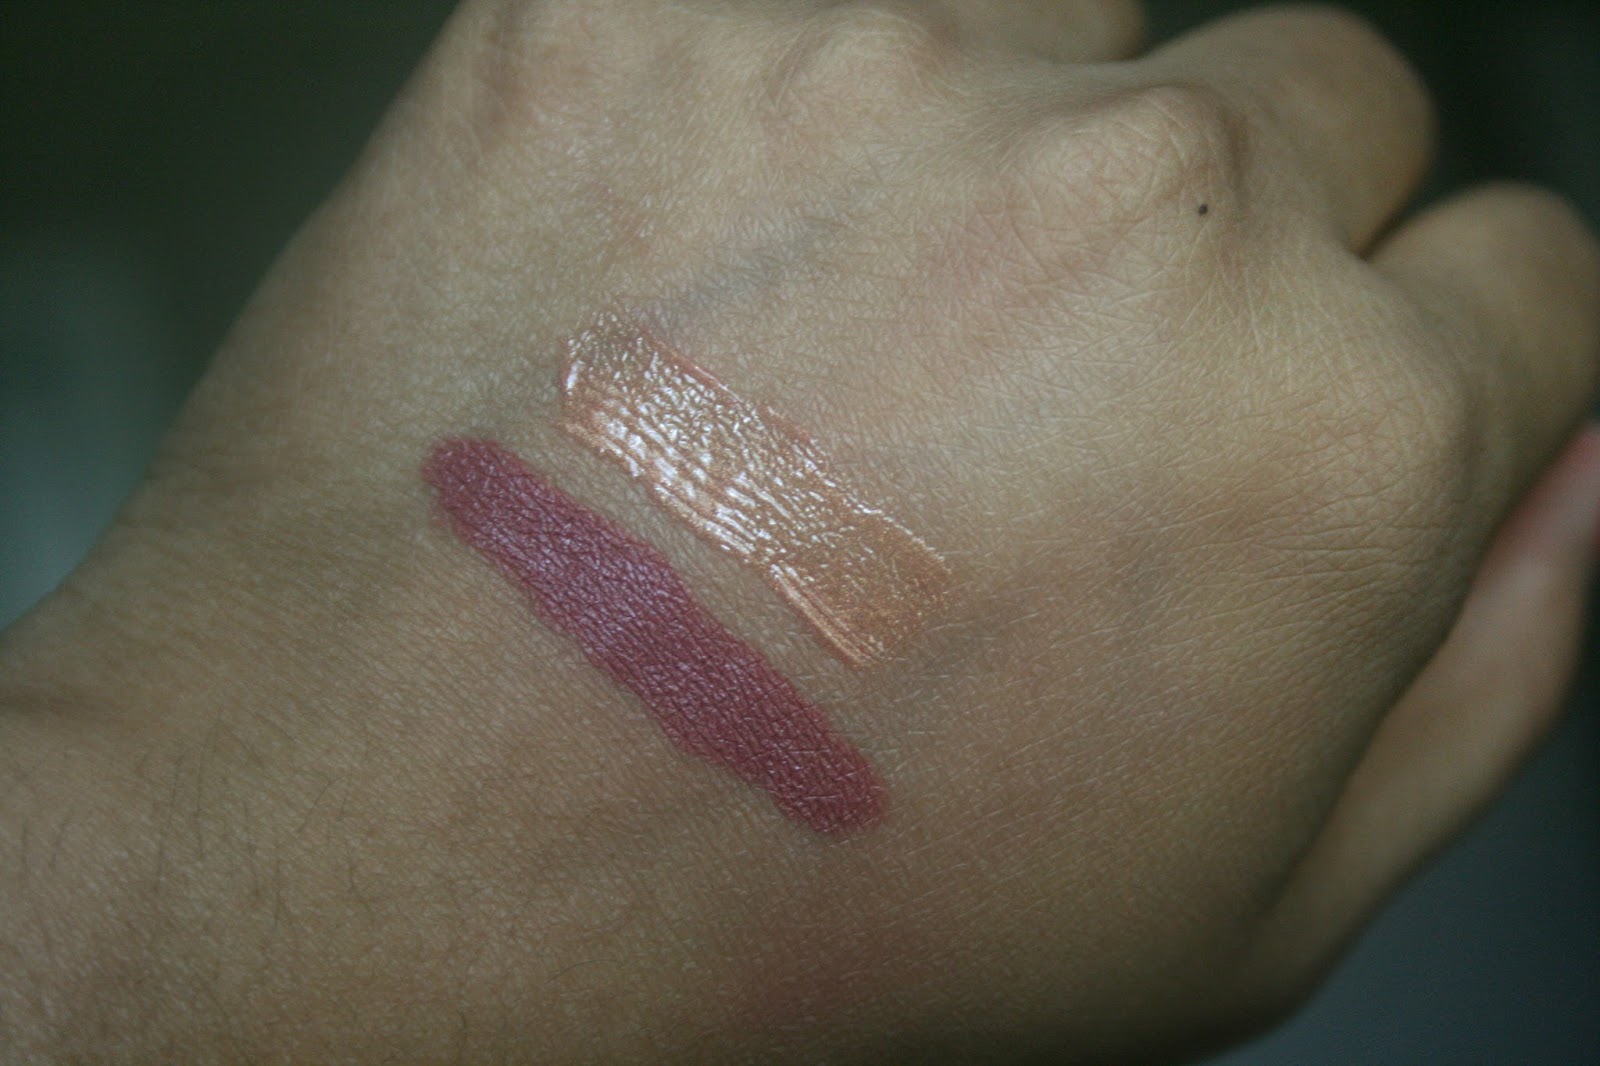 Bite Beauty Matte Creme Lip Crayon in Glace, Agave Lip Mask Champagne Swatches